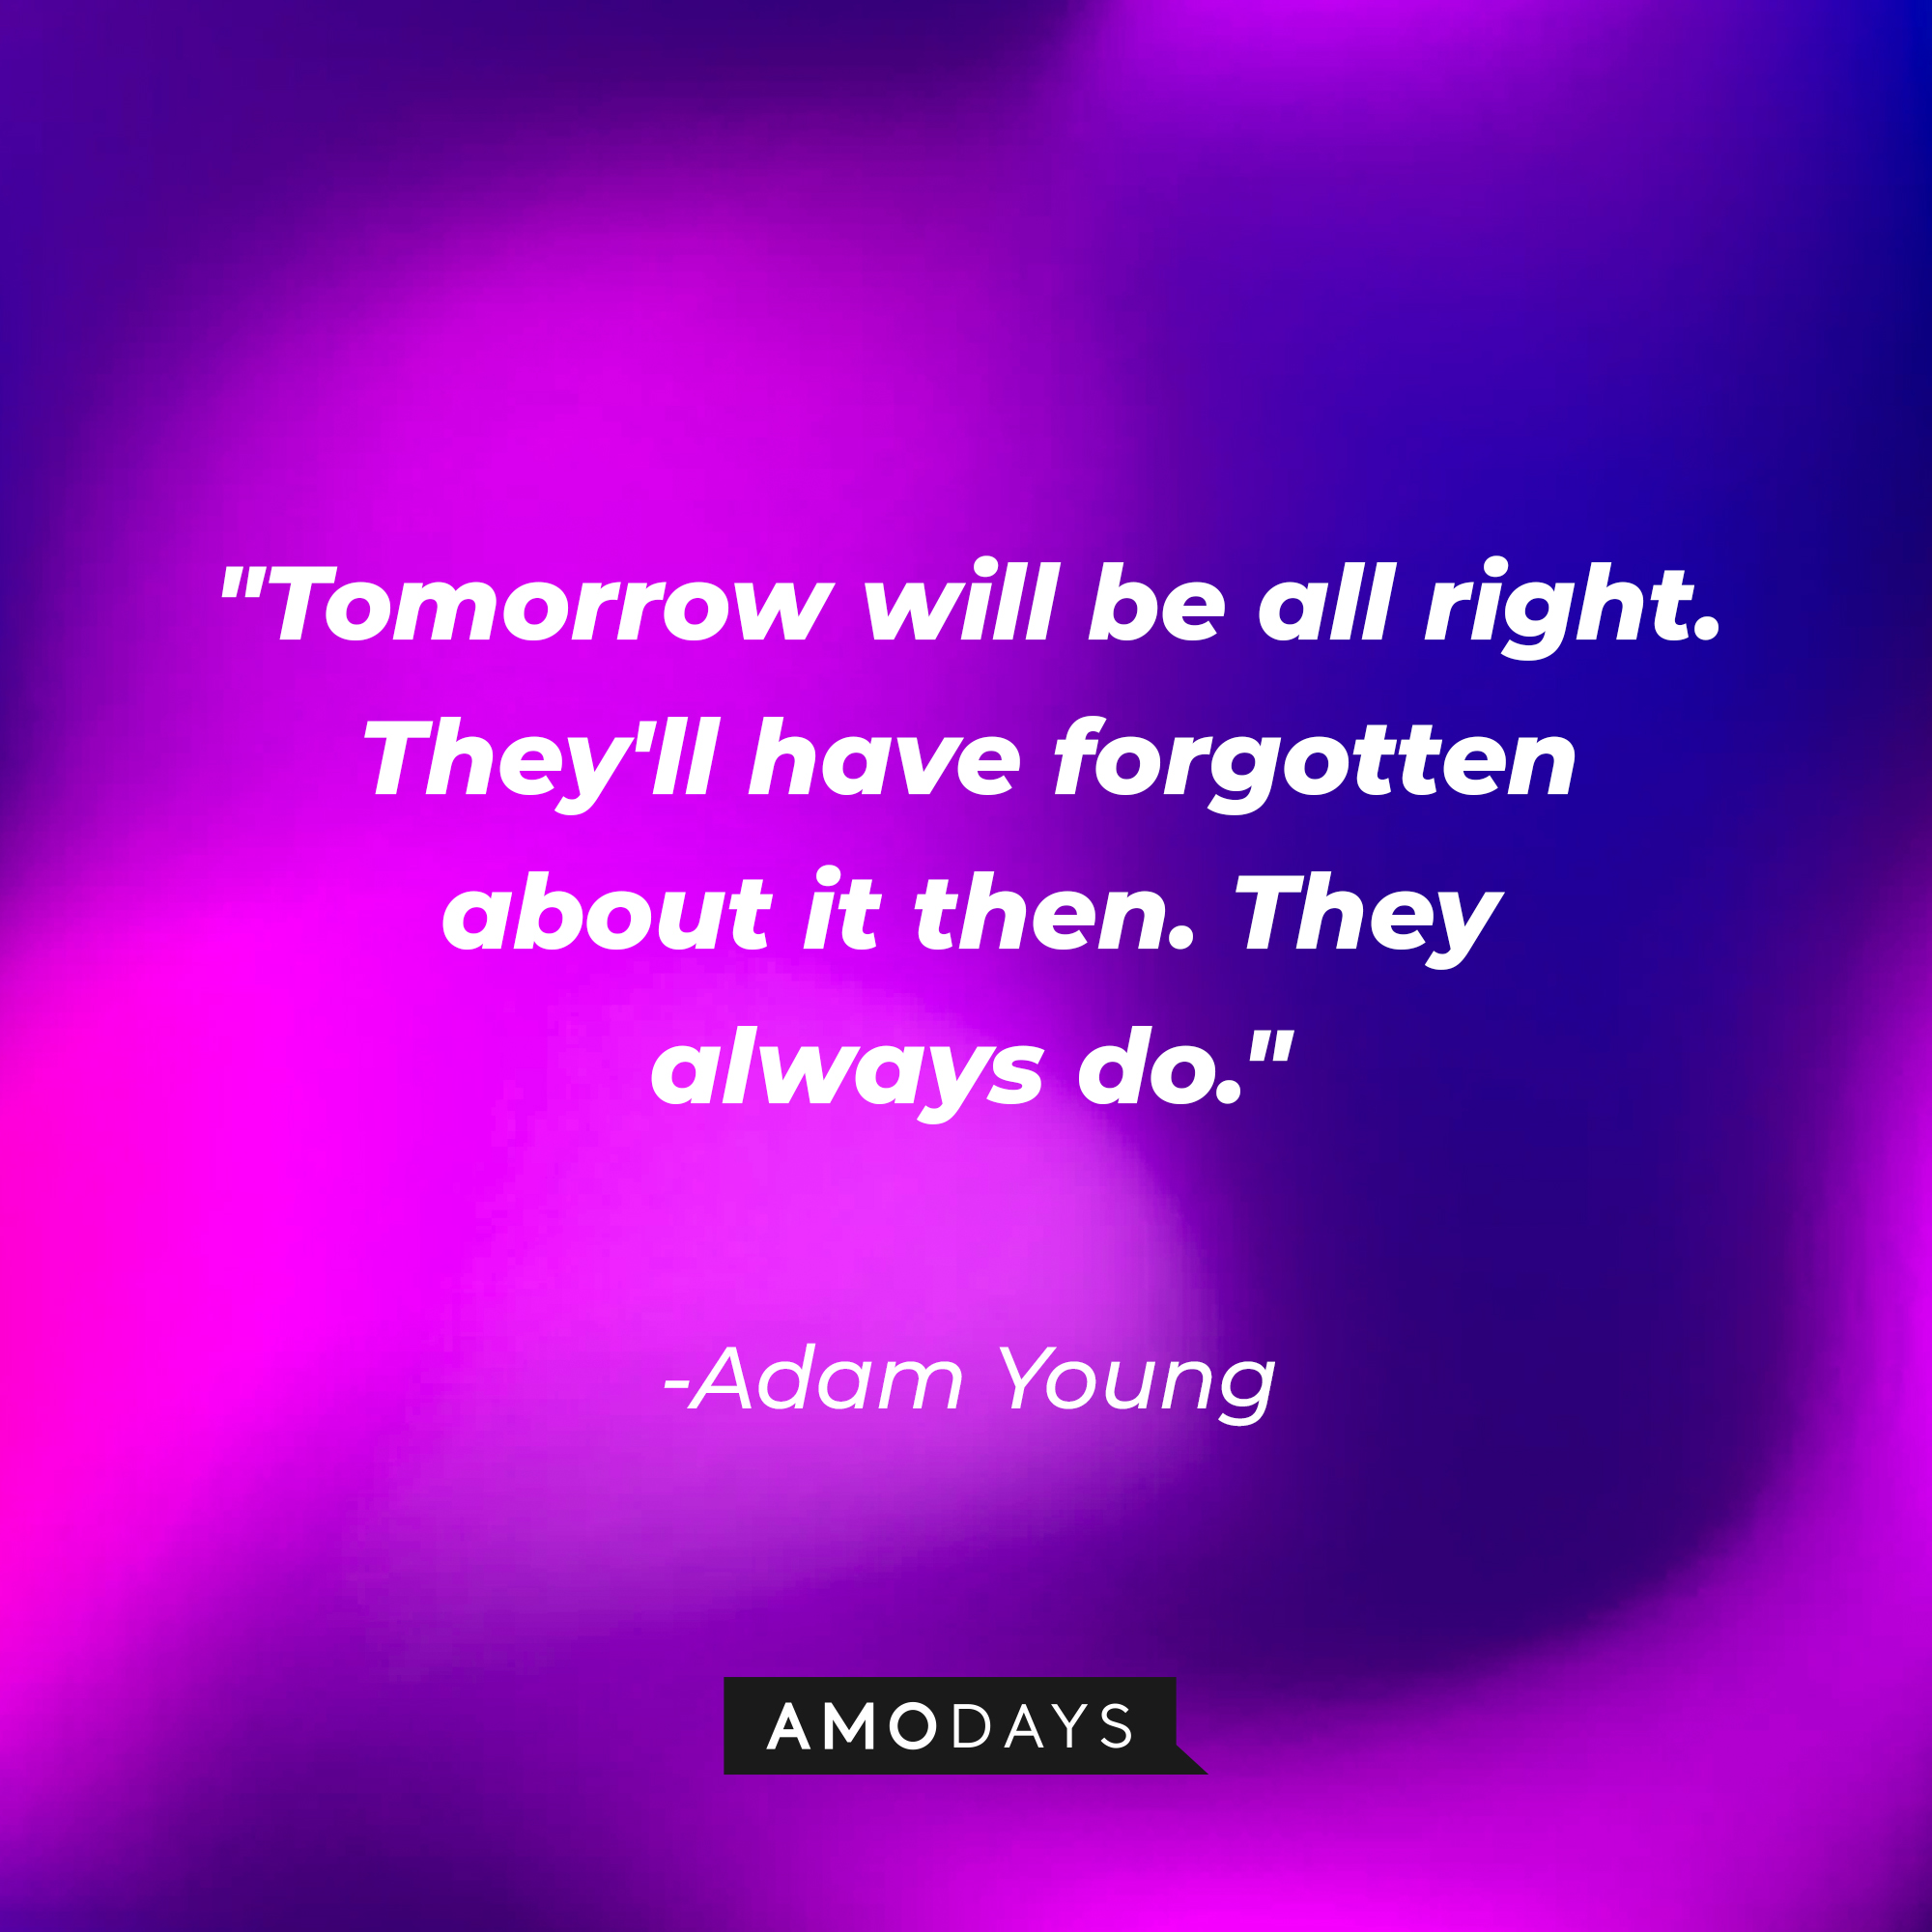 Adam Young's quote: "Tomorrow will be all right. They'll have forgotten about it then. They always do." | Source: AmoDays